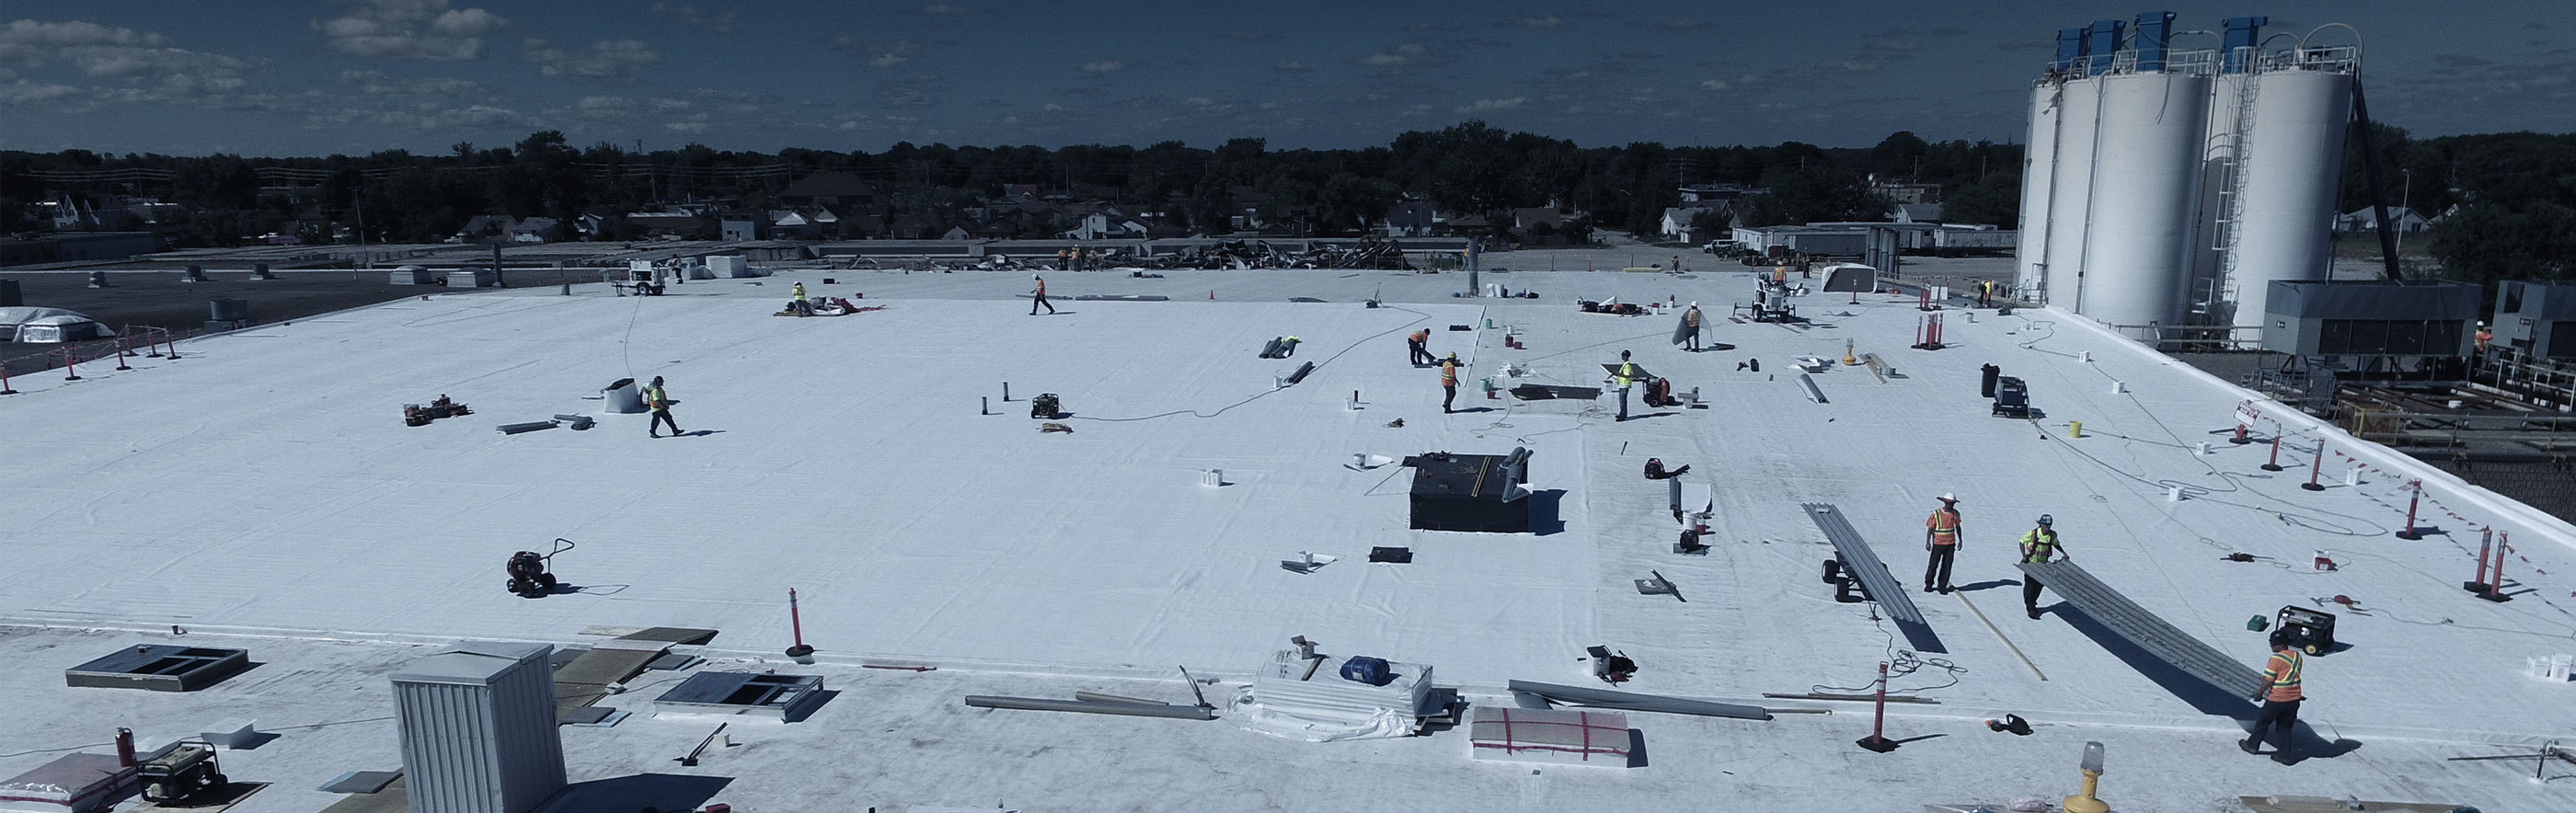 Overhead view of Empire Roofing employees working on commercial flat roof installation/repair